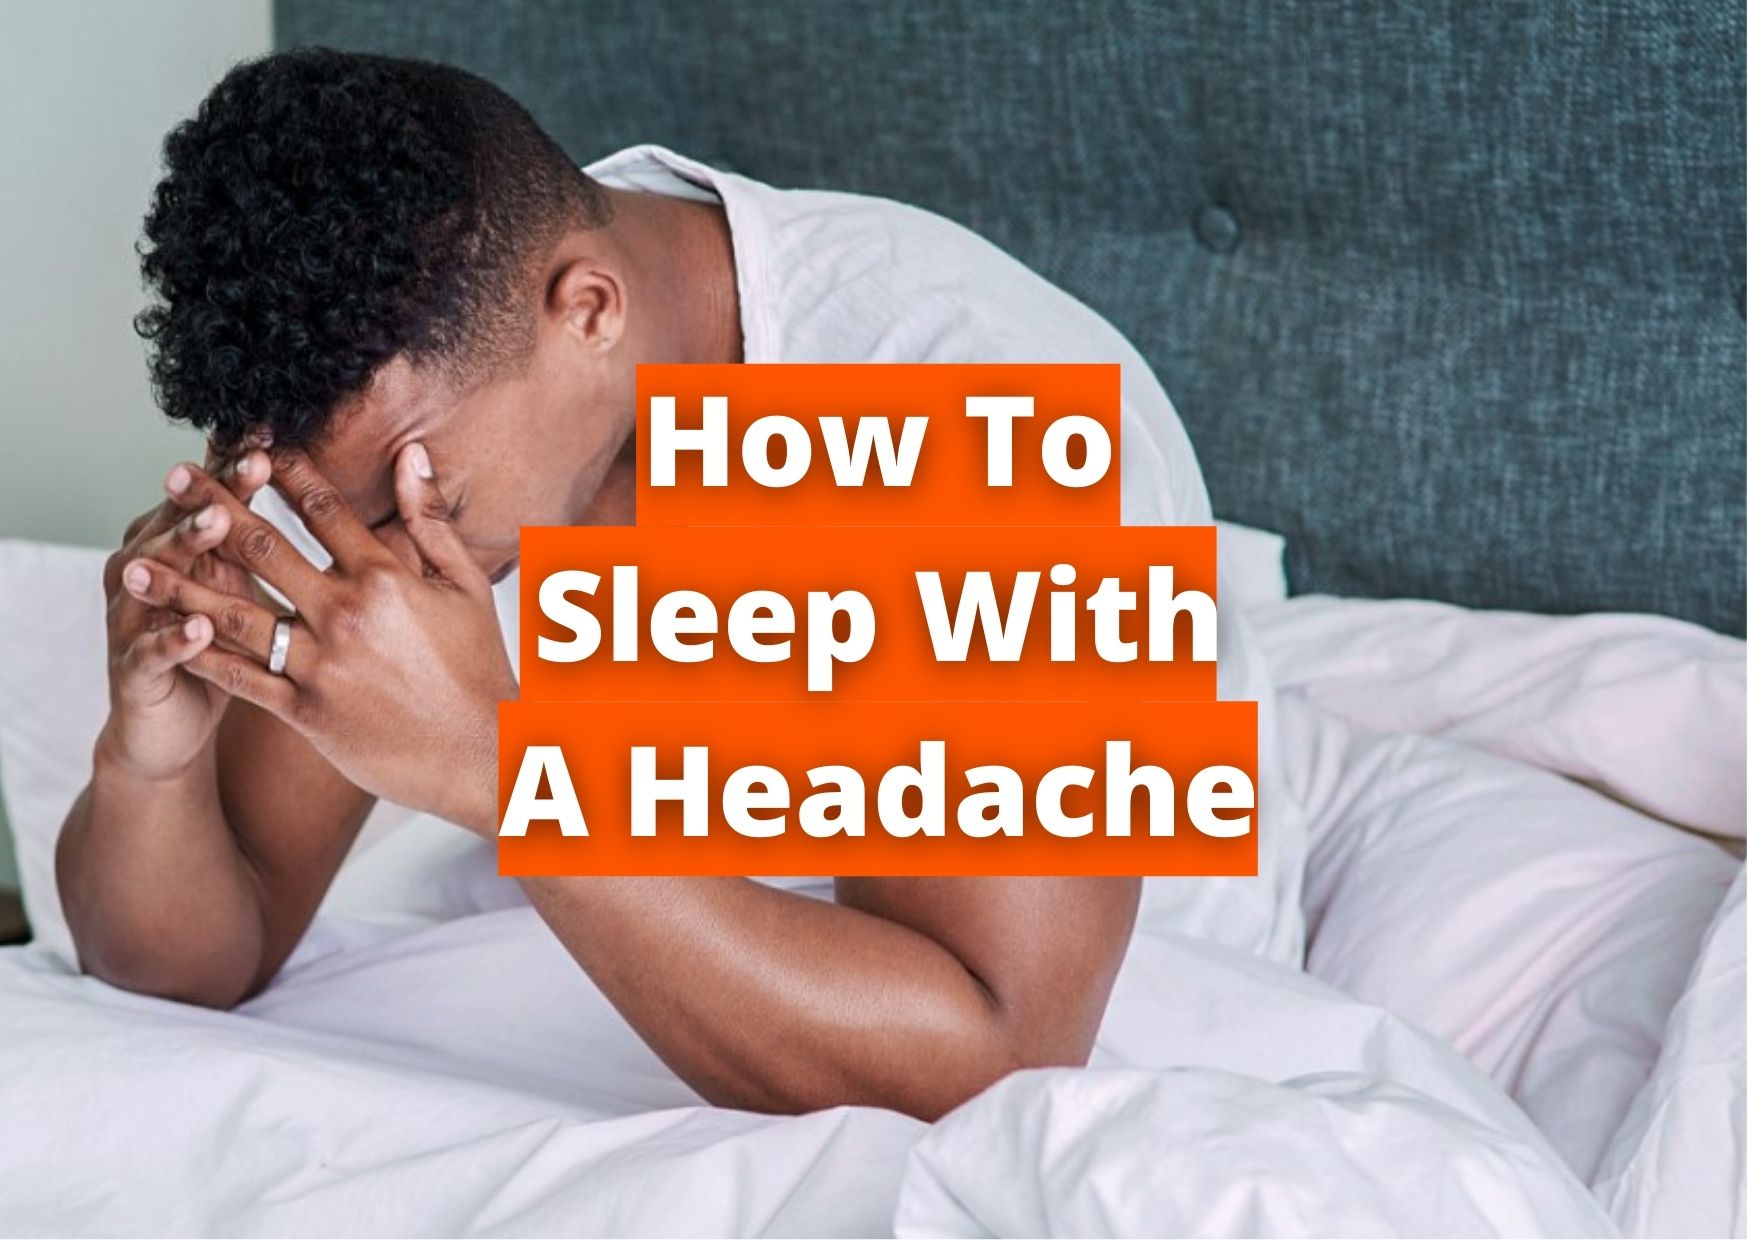 waking up with headaches